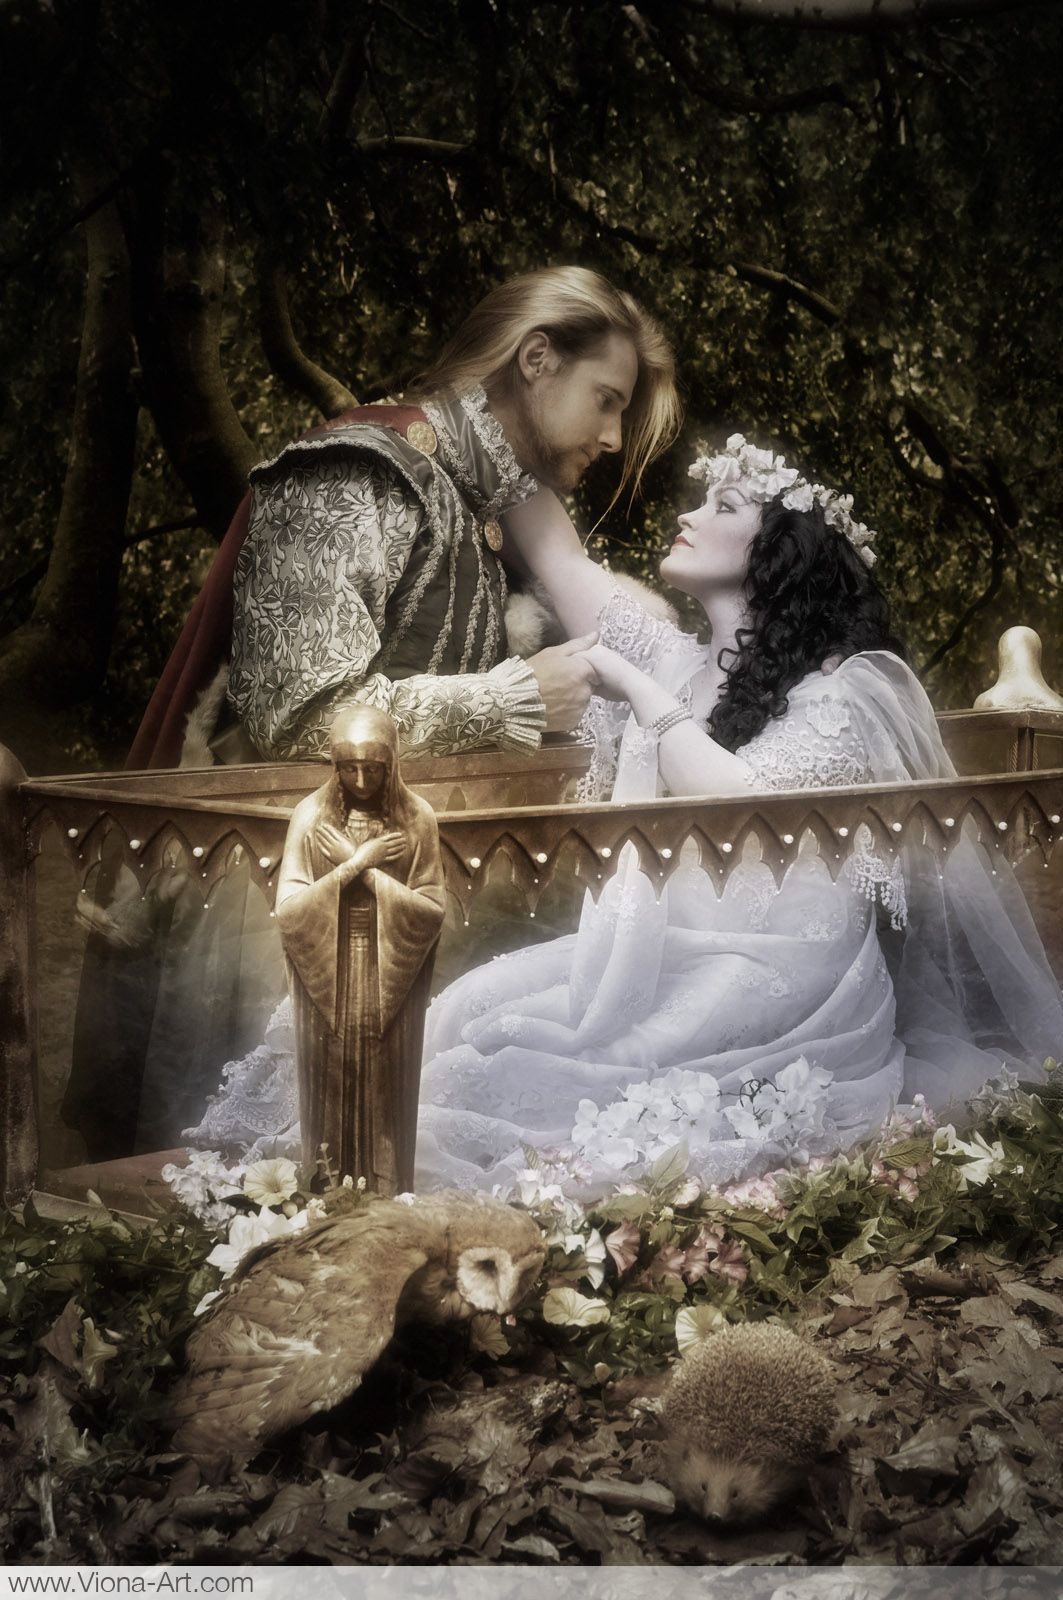 Snow White and the prince